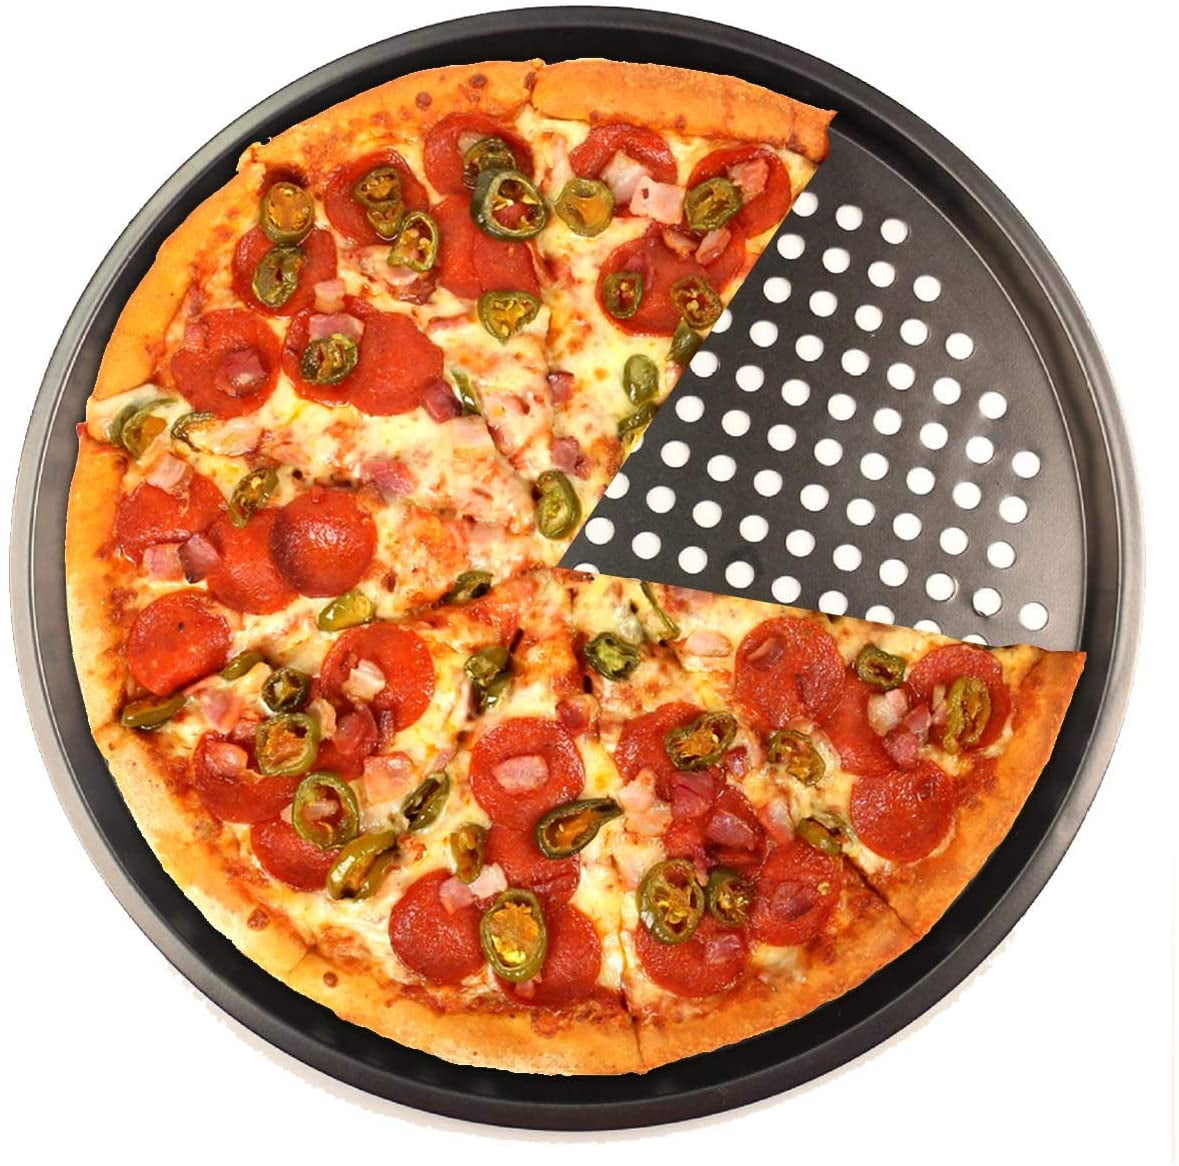 ValueHall Pizza Pan with Holes 12 Inch Carbon Steel Pizza Tray 2 Pack Nonstick Round Pizza Baking Tray for Home Restaurant Kitchen V4A06